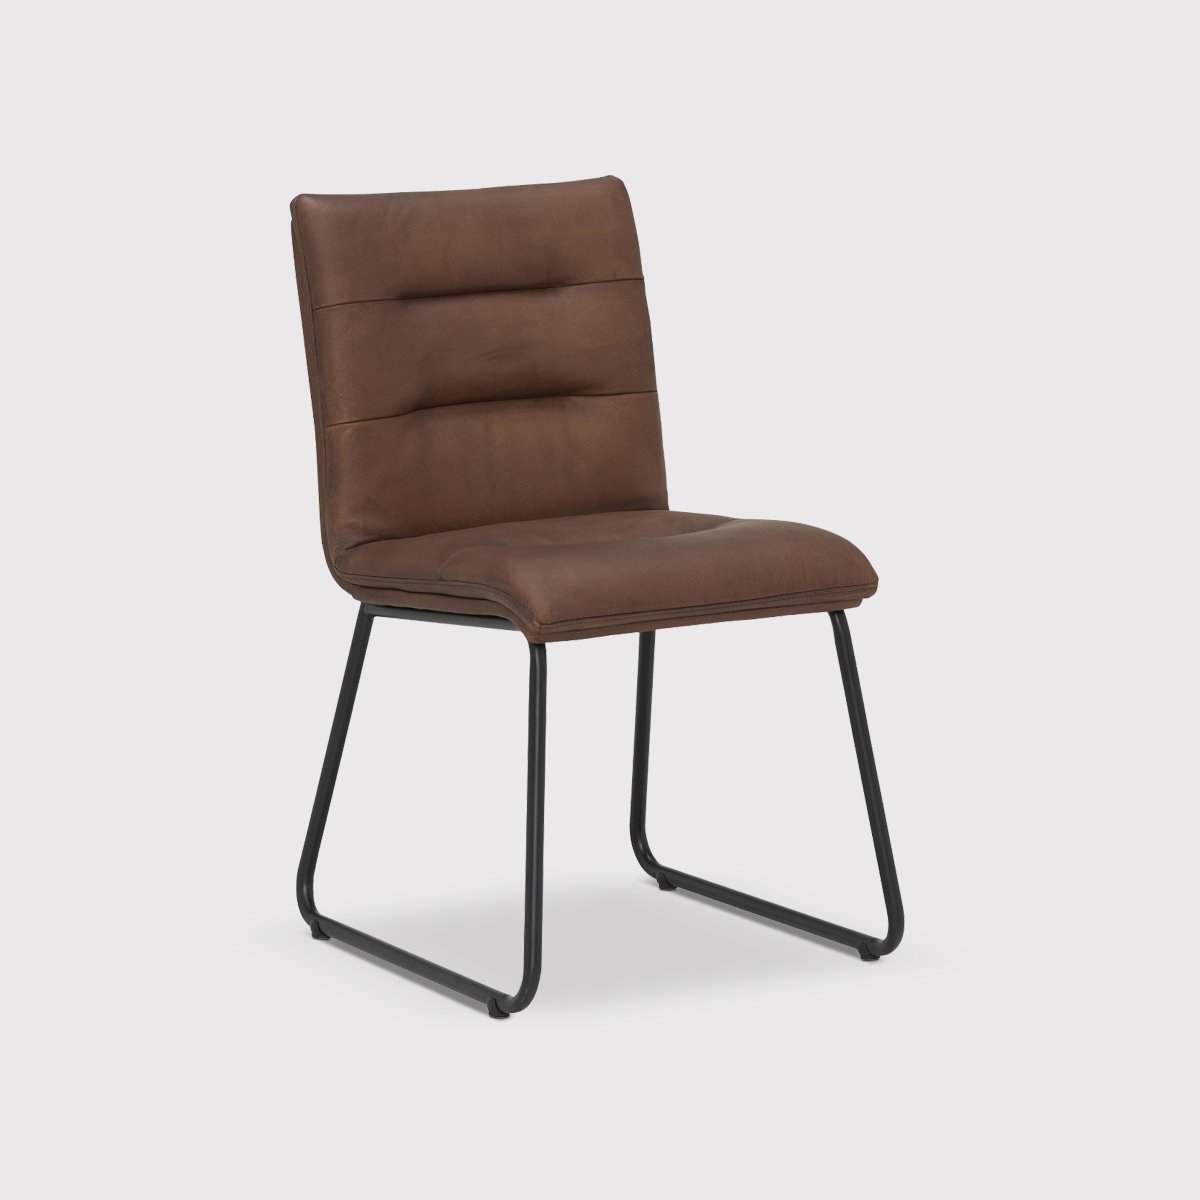 Pure Furniture Zena Dining Chair, Brown | Barker & Stonehouse